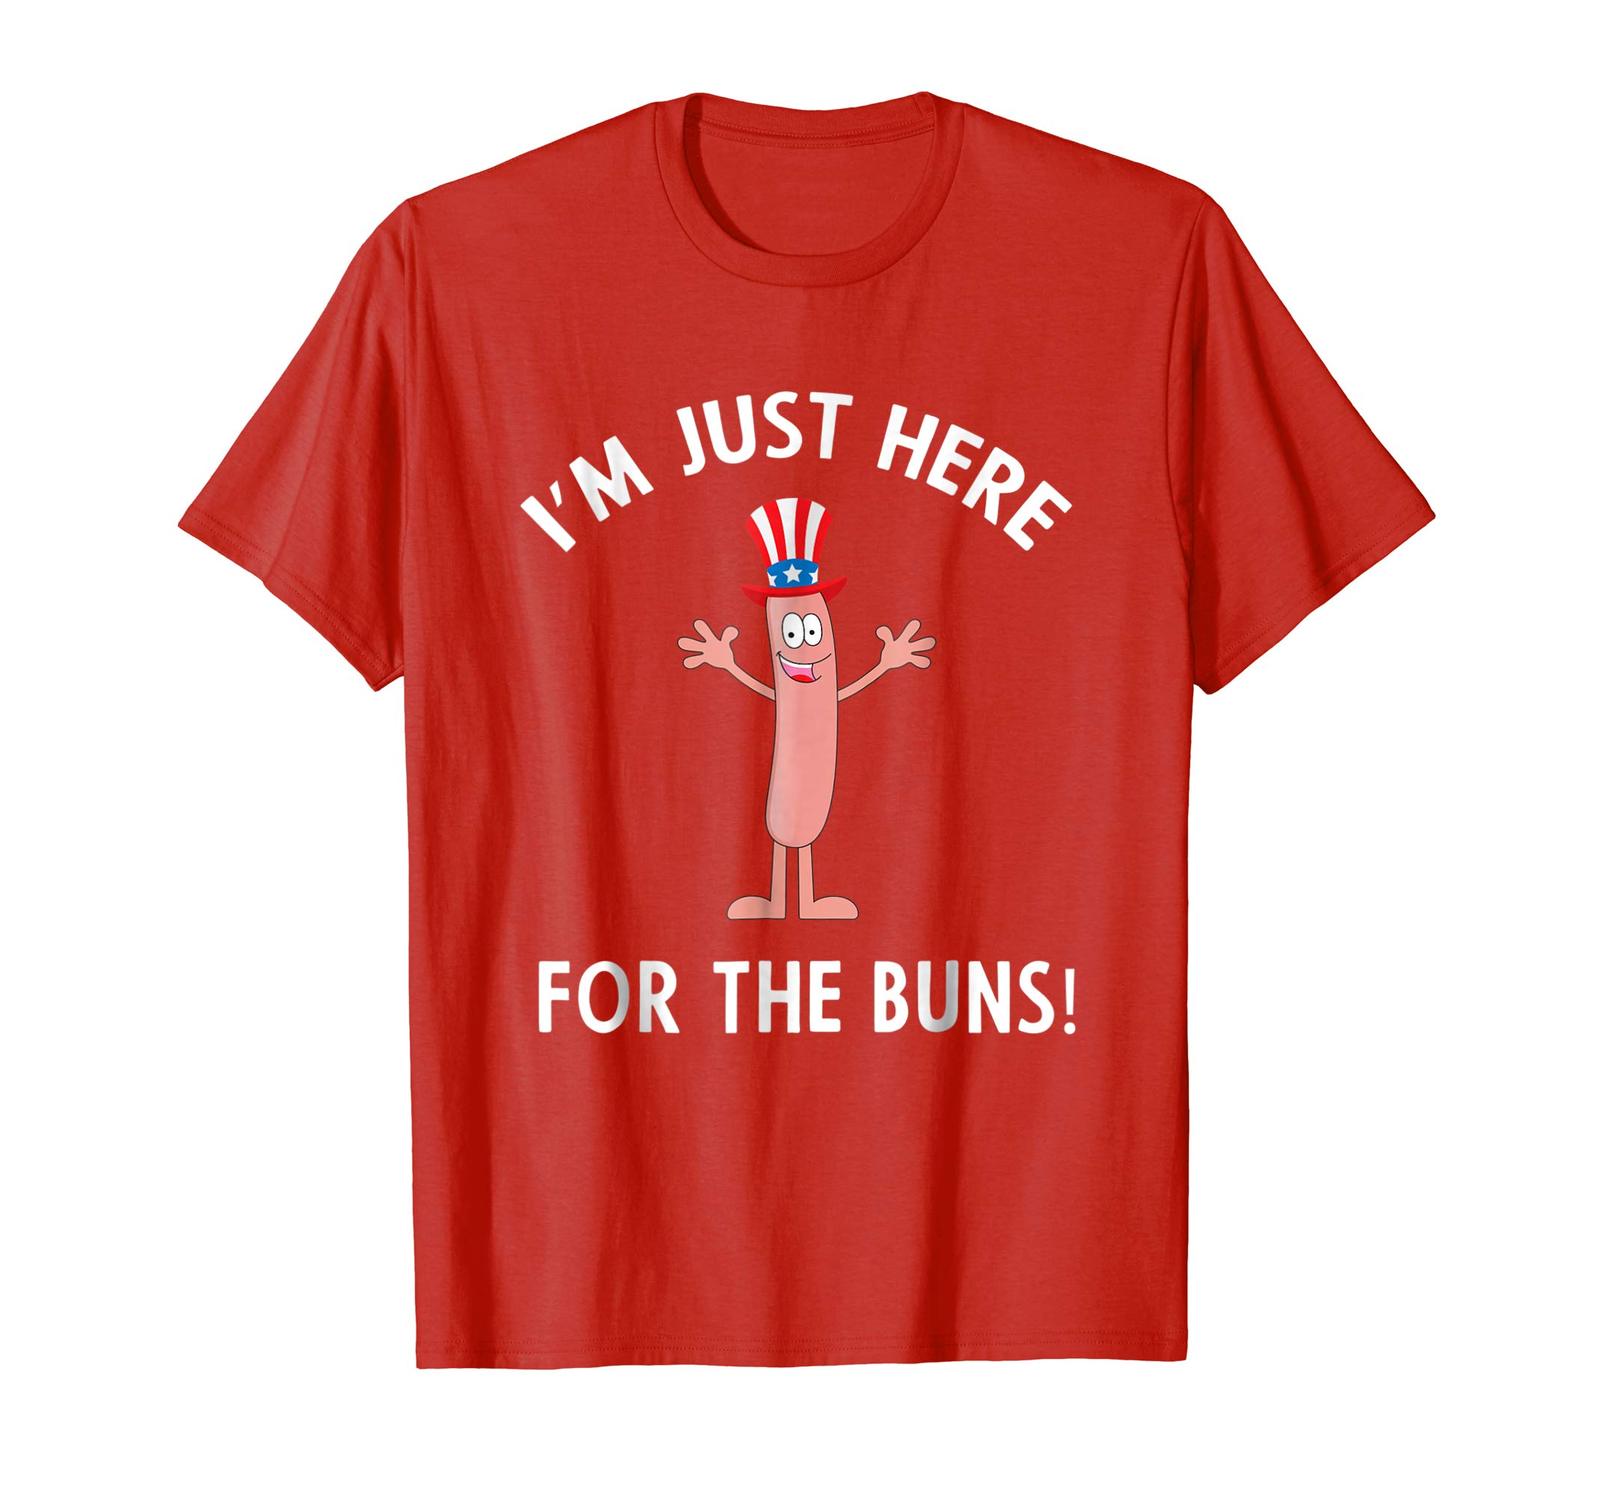 Dog Fashion - Funny I'M JUST HERE FOR THE BUNS Patriotic Hot Dog T-Shirt Men